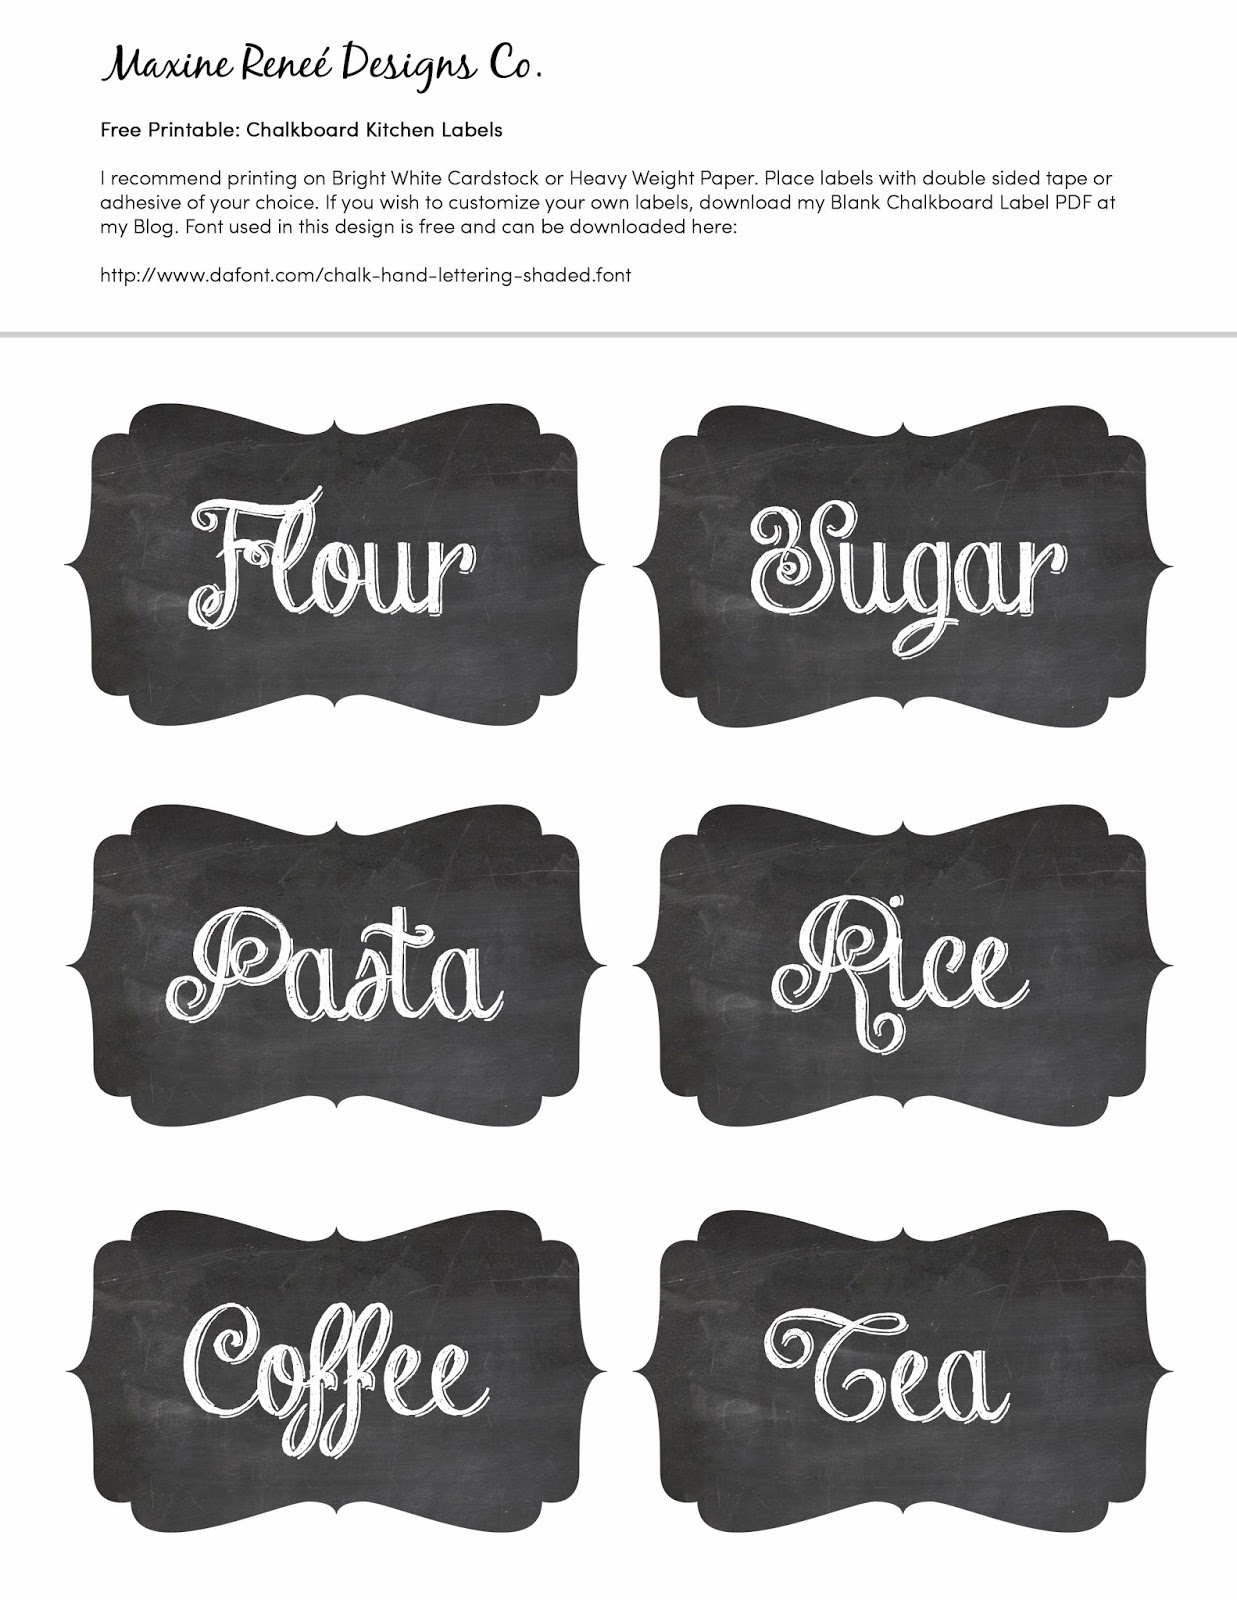 Maxine Renee Designs: Free Printables - Chalkboard Labels - Free Printable From The Kitchen Of Labels